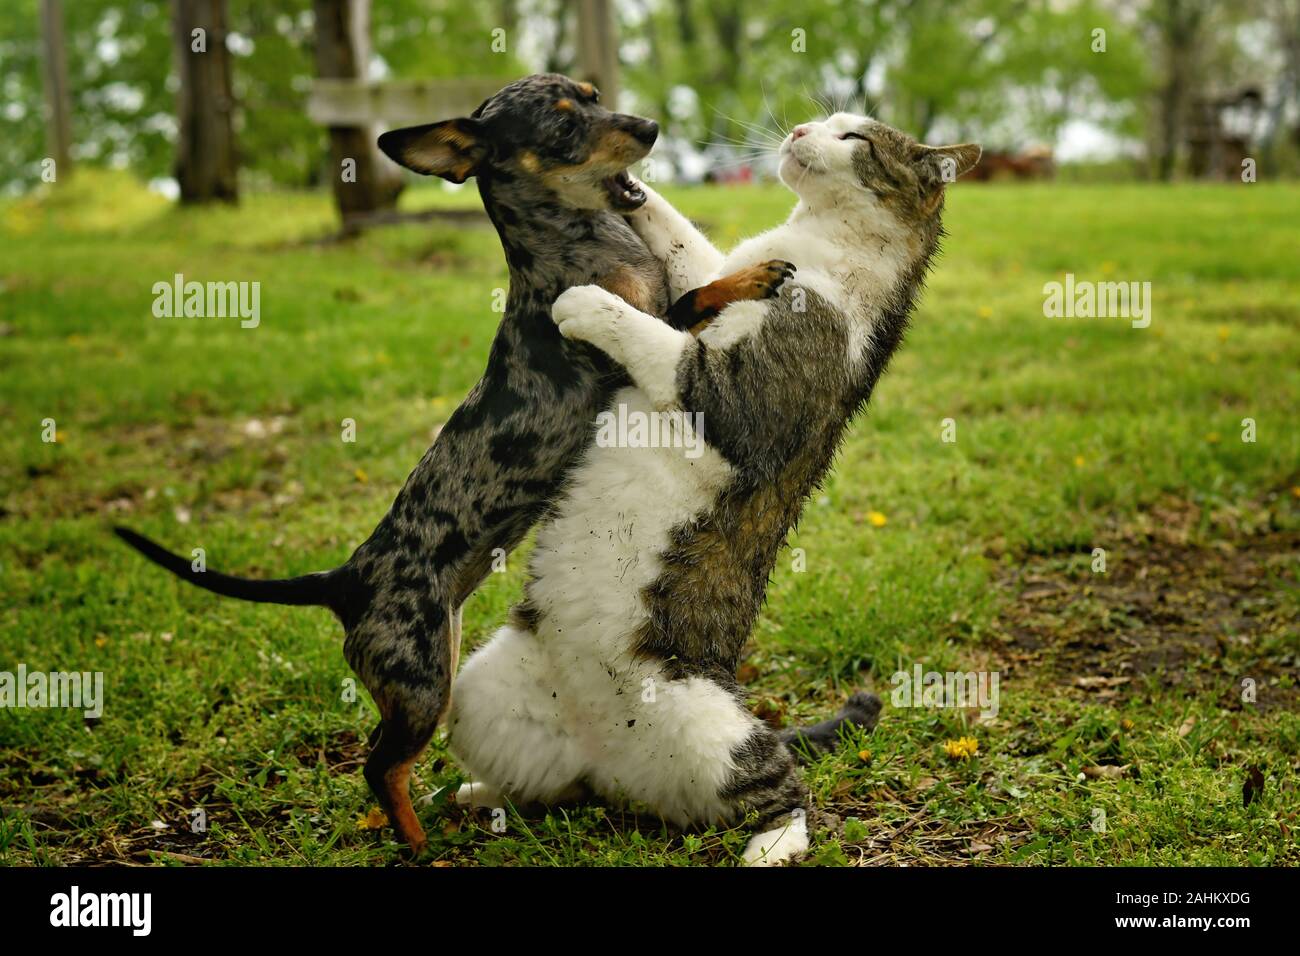 cat and dog fight Stock Photo